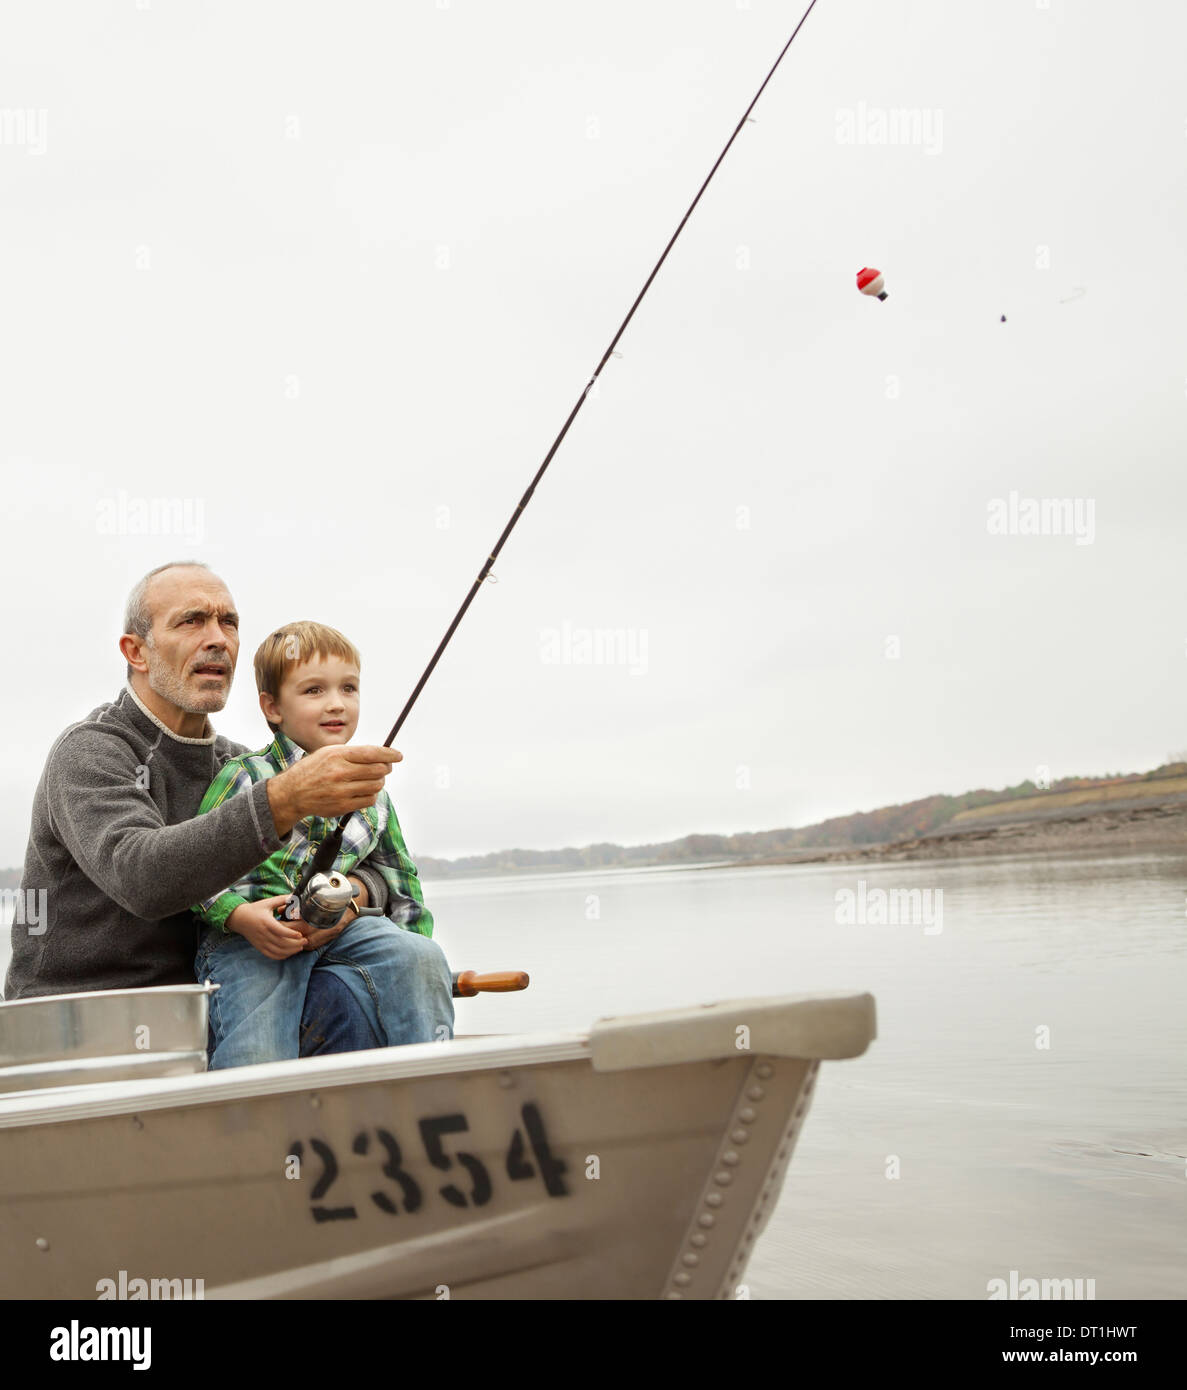 A day out at Ashokan lake A man showing a young boy how to fish sitting in a boat Stock Photo